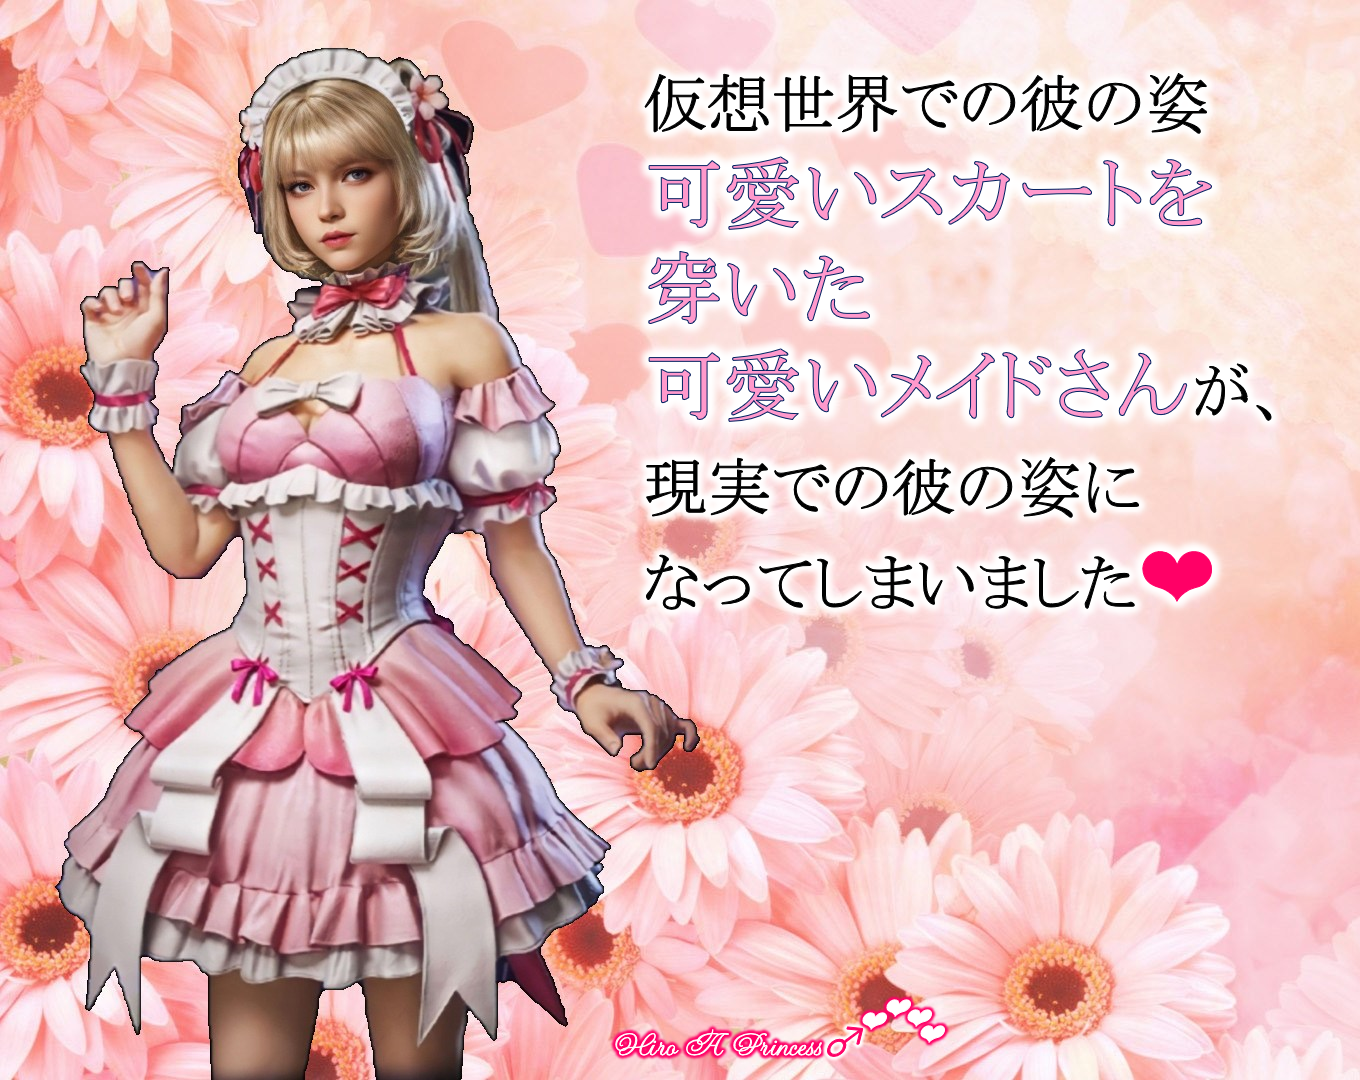 His appearance in the virtual world, a Cute Maid in Cute Skirt, has become his reality J